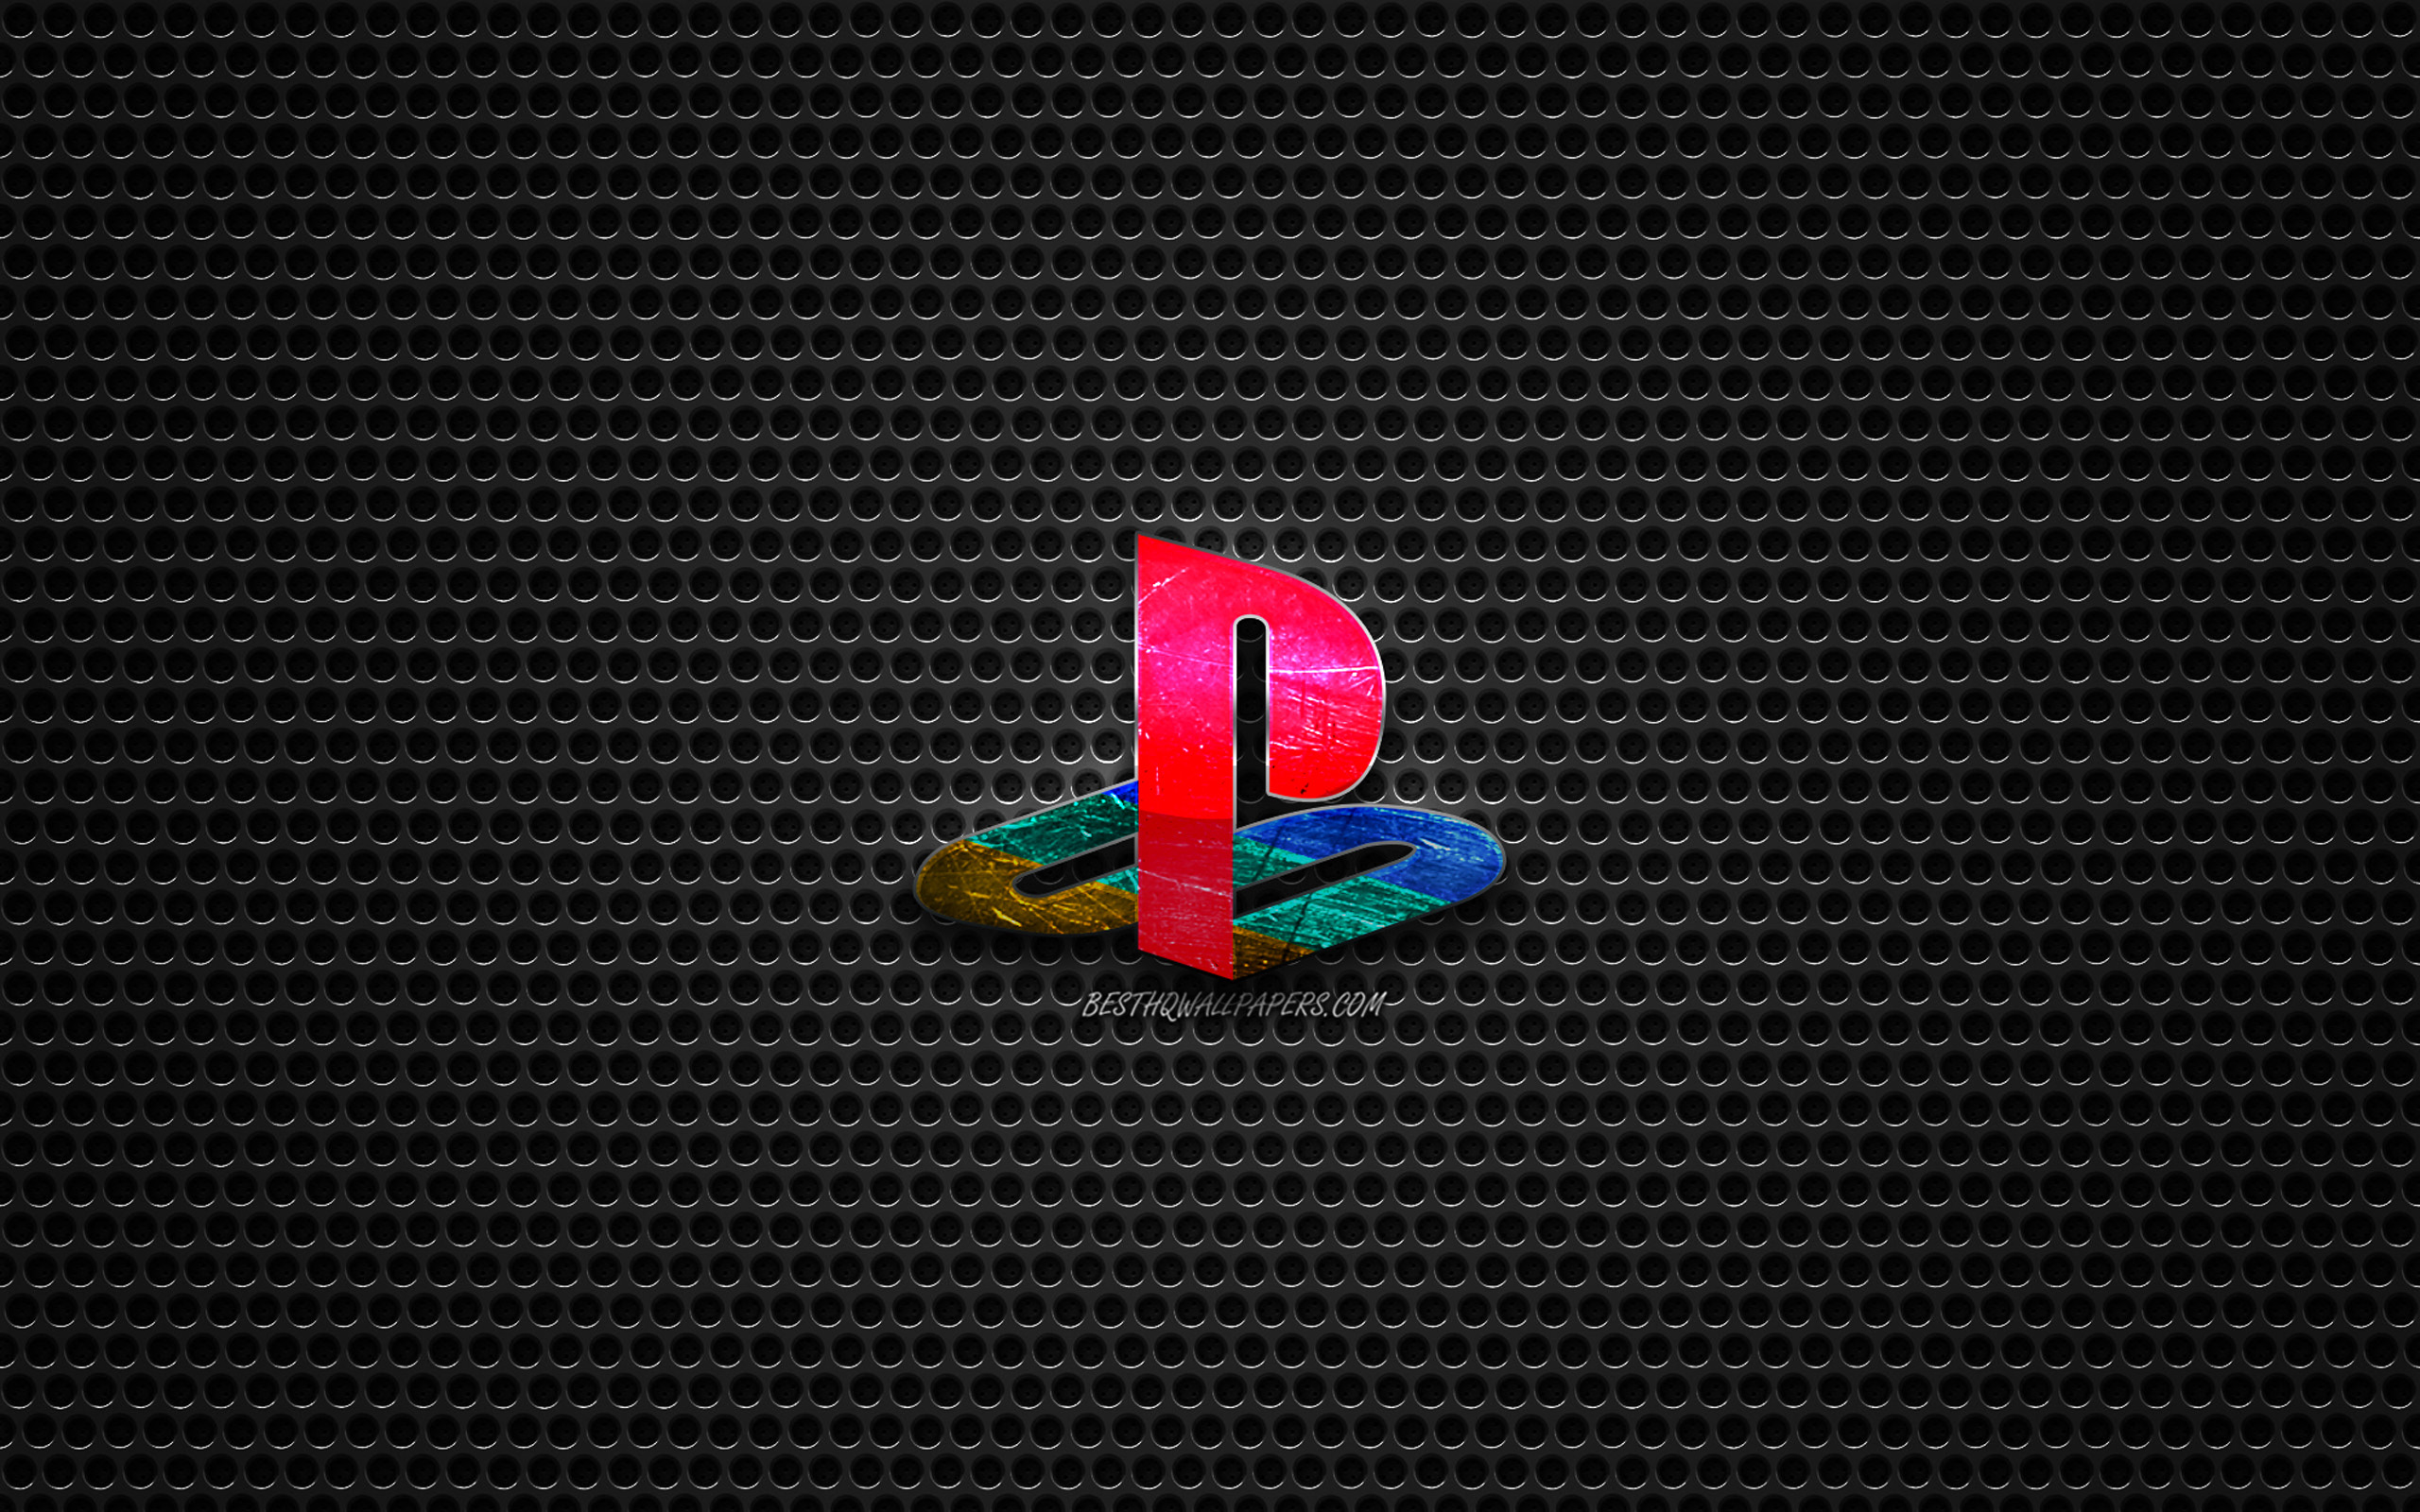 Ps4 Image Download Wallpapers